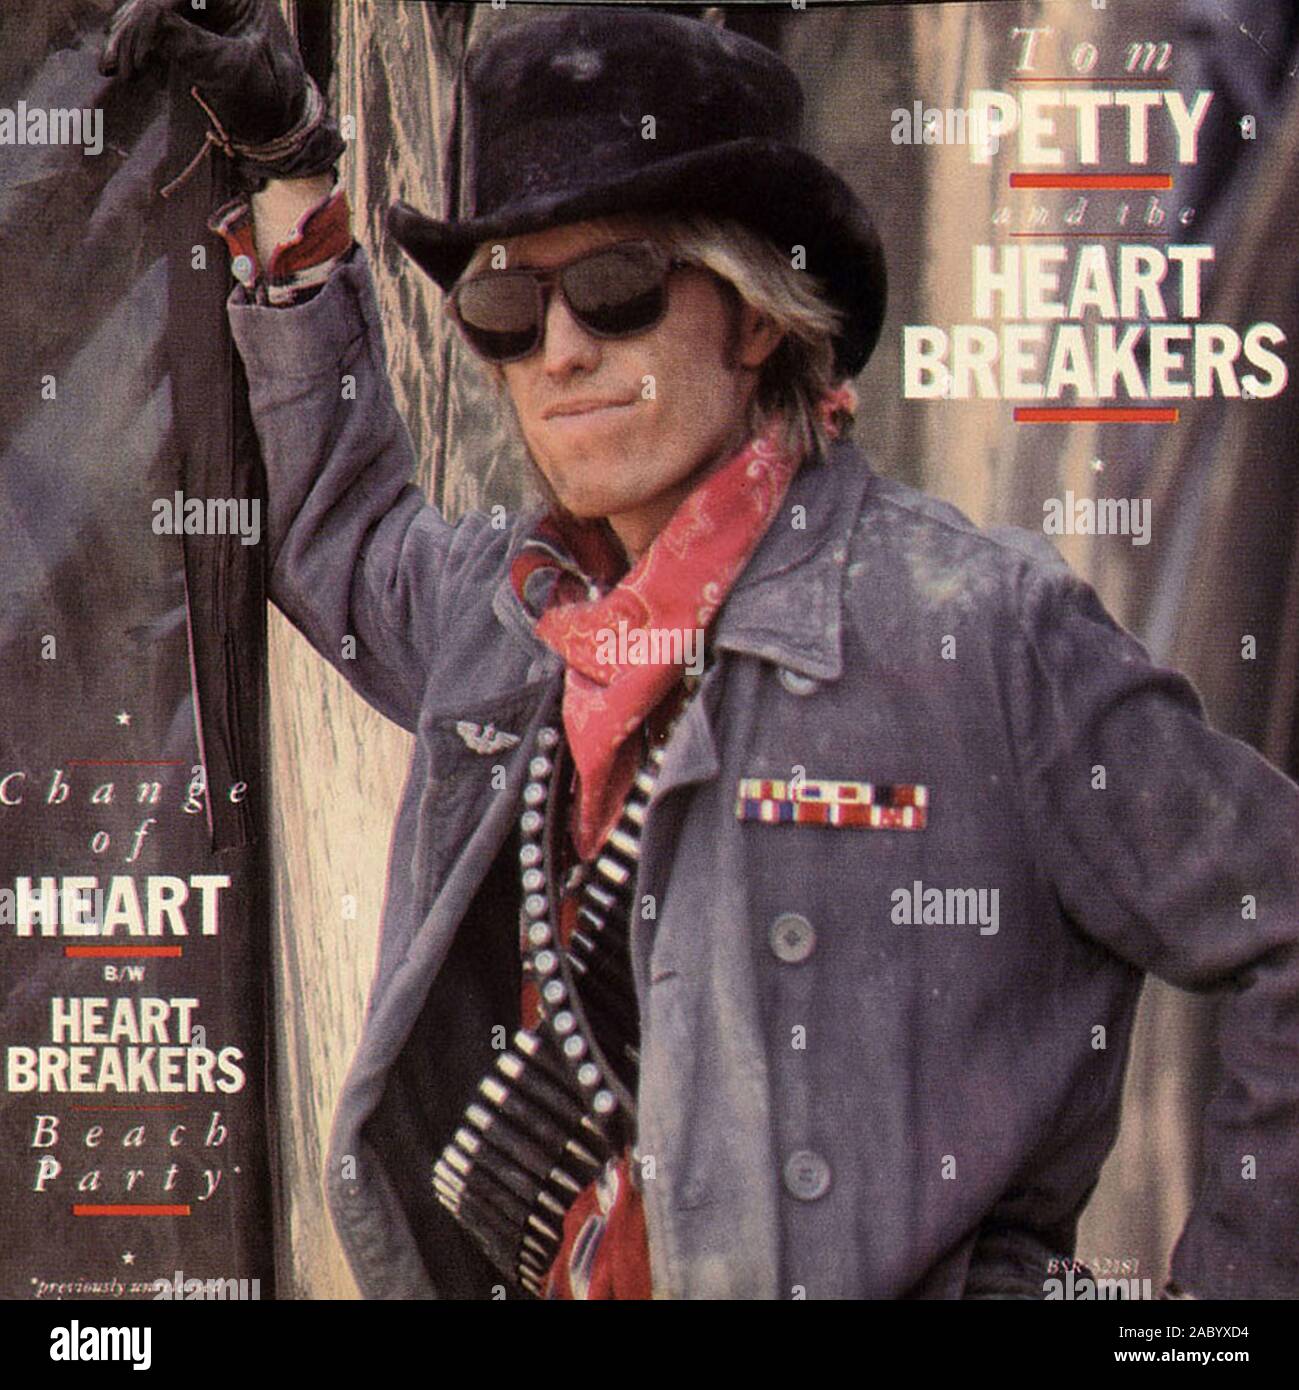 Tom Petty and The Heartbreakers - Change Of Heart   - Vintage vinyl album cover Stock Photo